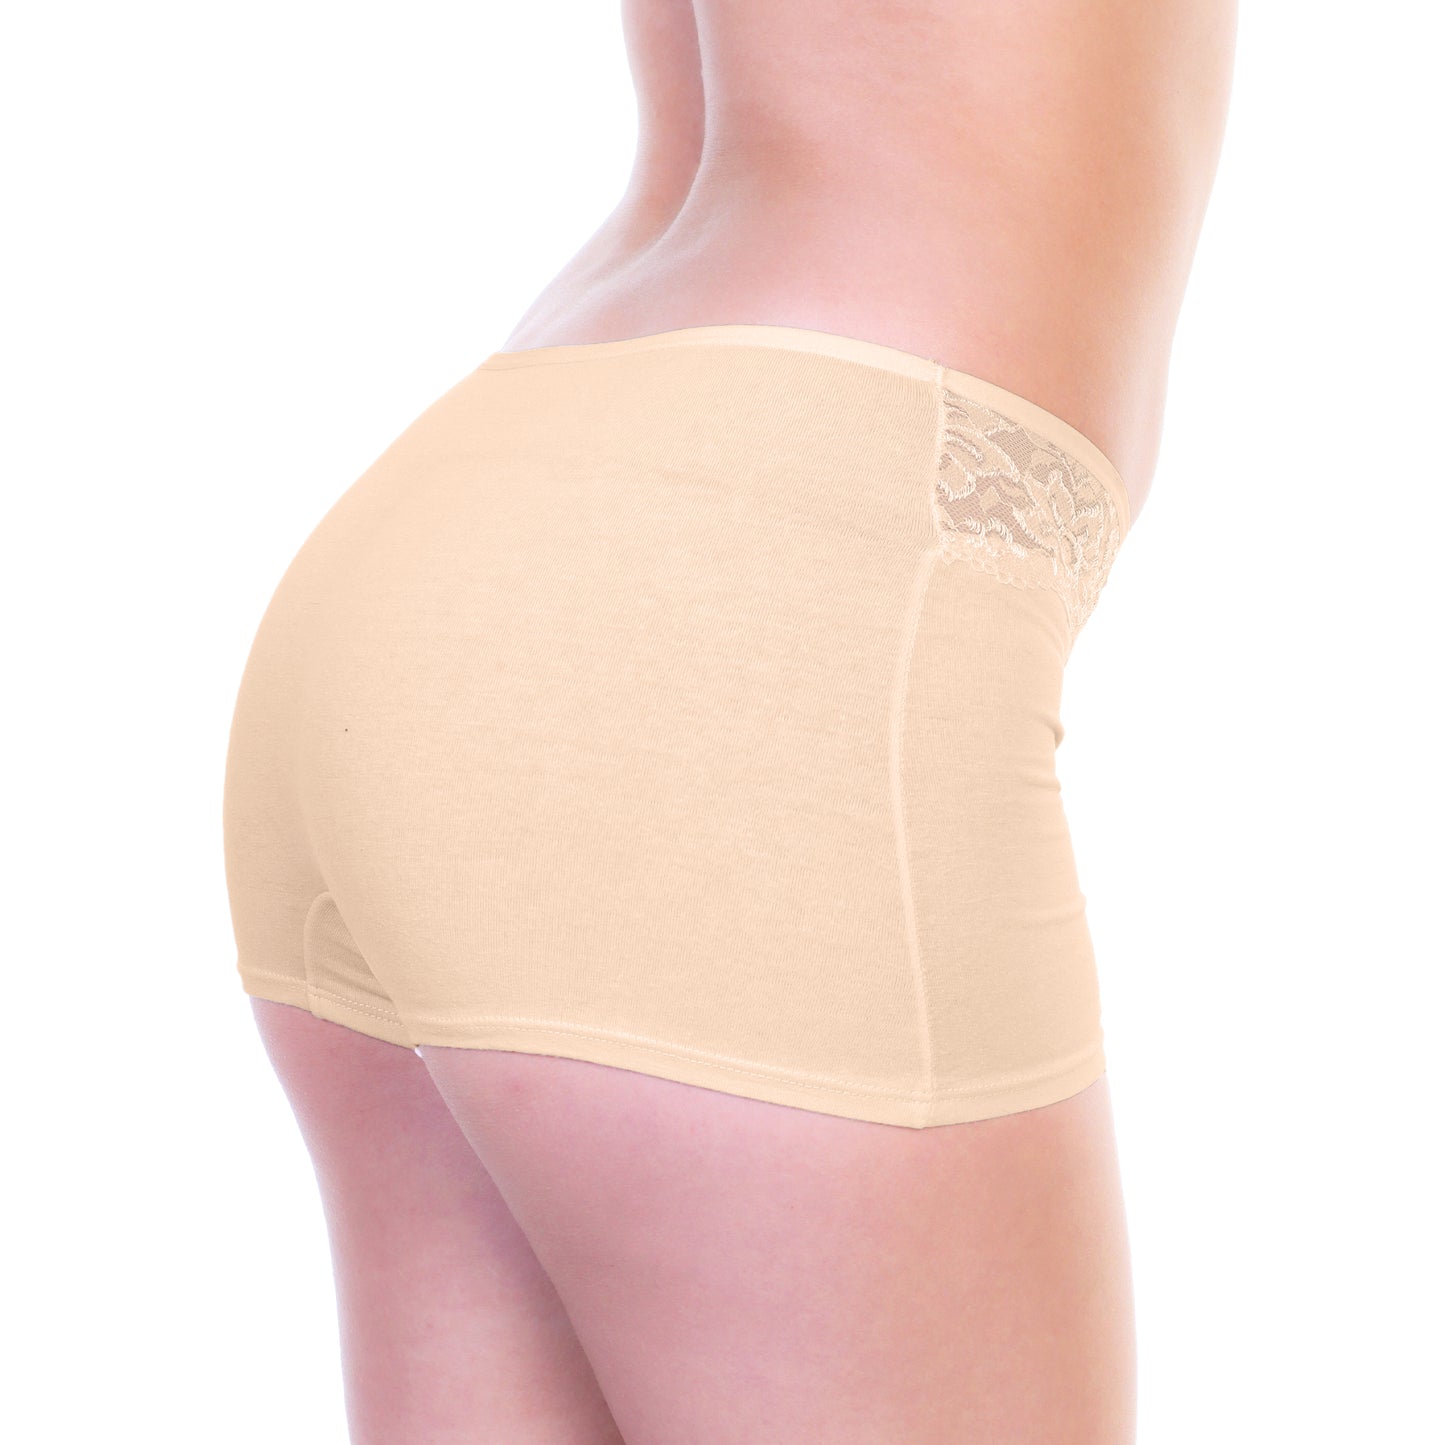 Angelina Classic Cotton Boyshort Panties with Lace Accent (12-Pack), #G6660